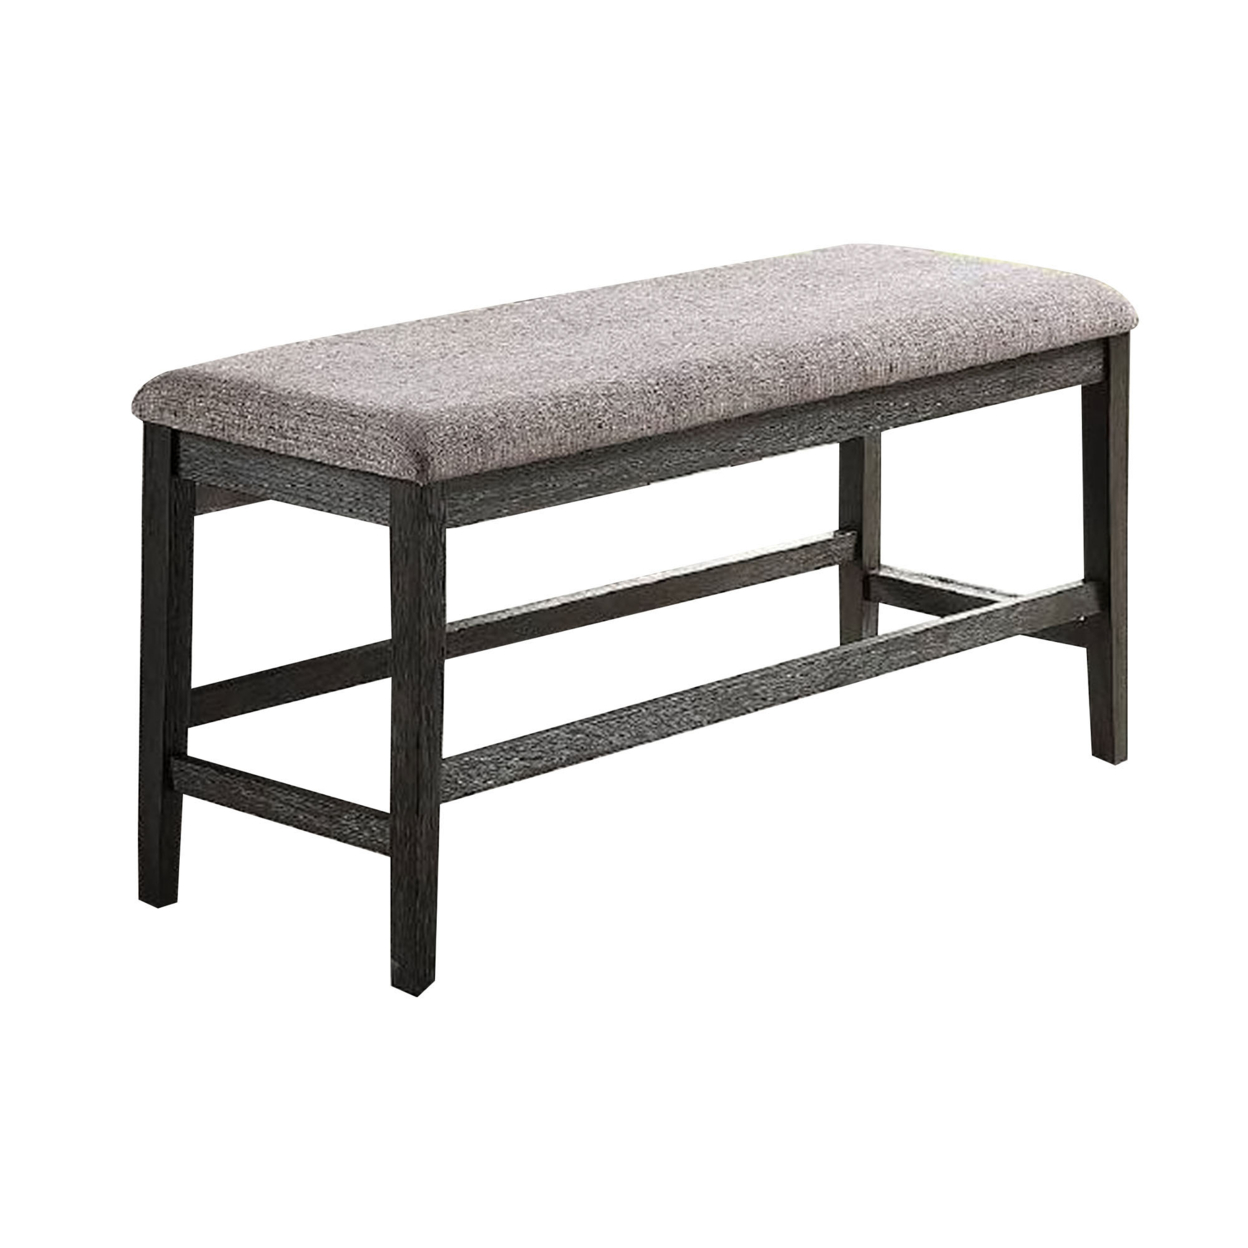 Distressed Wooden Dining Bench With Fabric Seat, Gray- Saltoro Sherpi